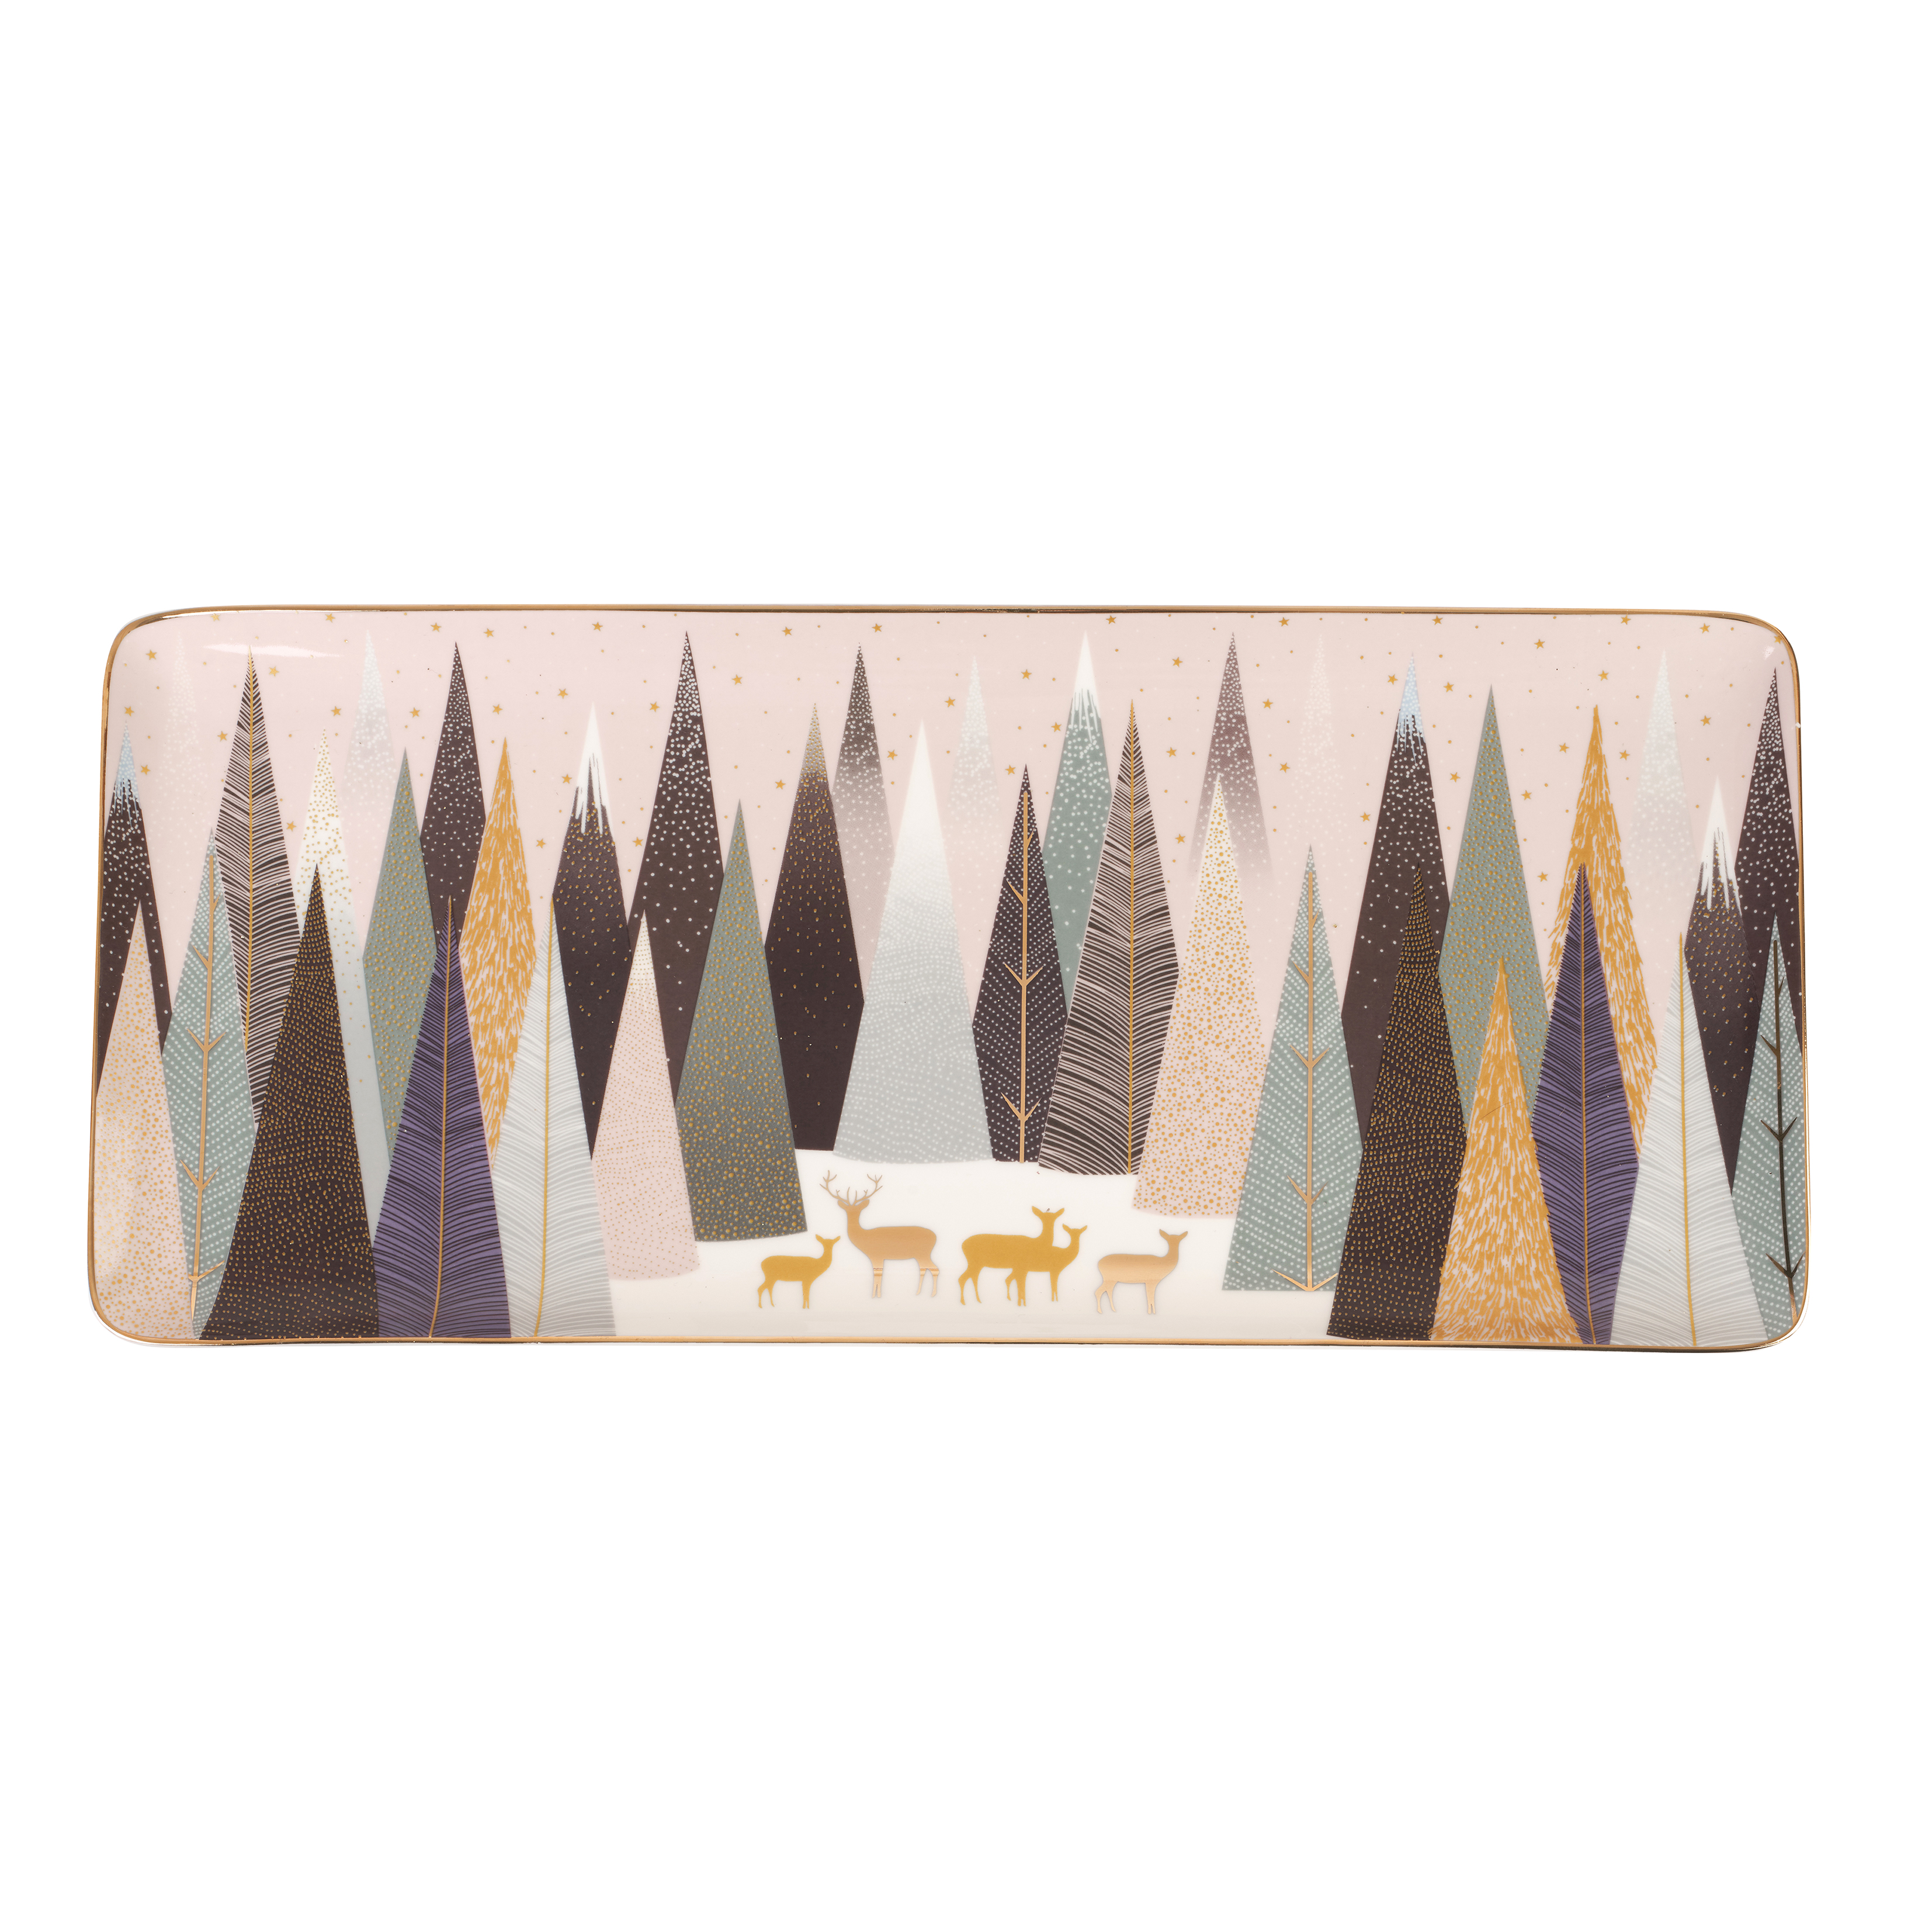 Sara Miller London Frosted Pines 14 Inch Sandwich Tray image number null